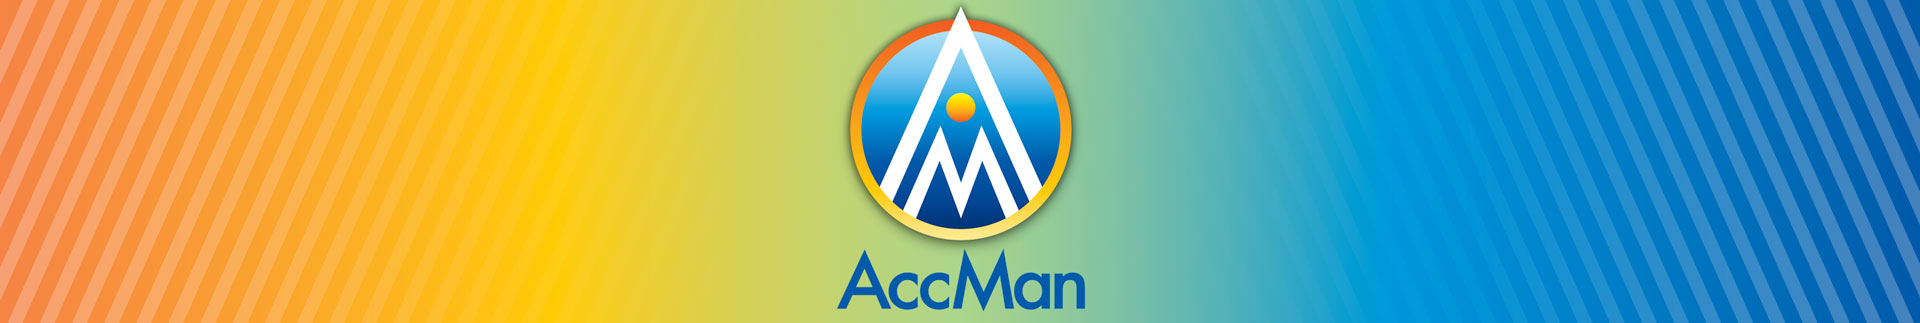 AccMan, Full-Service Accounting Firm | Seattle WA